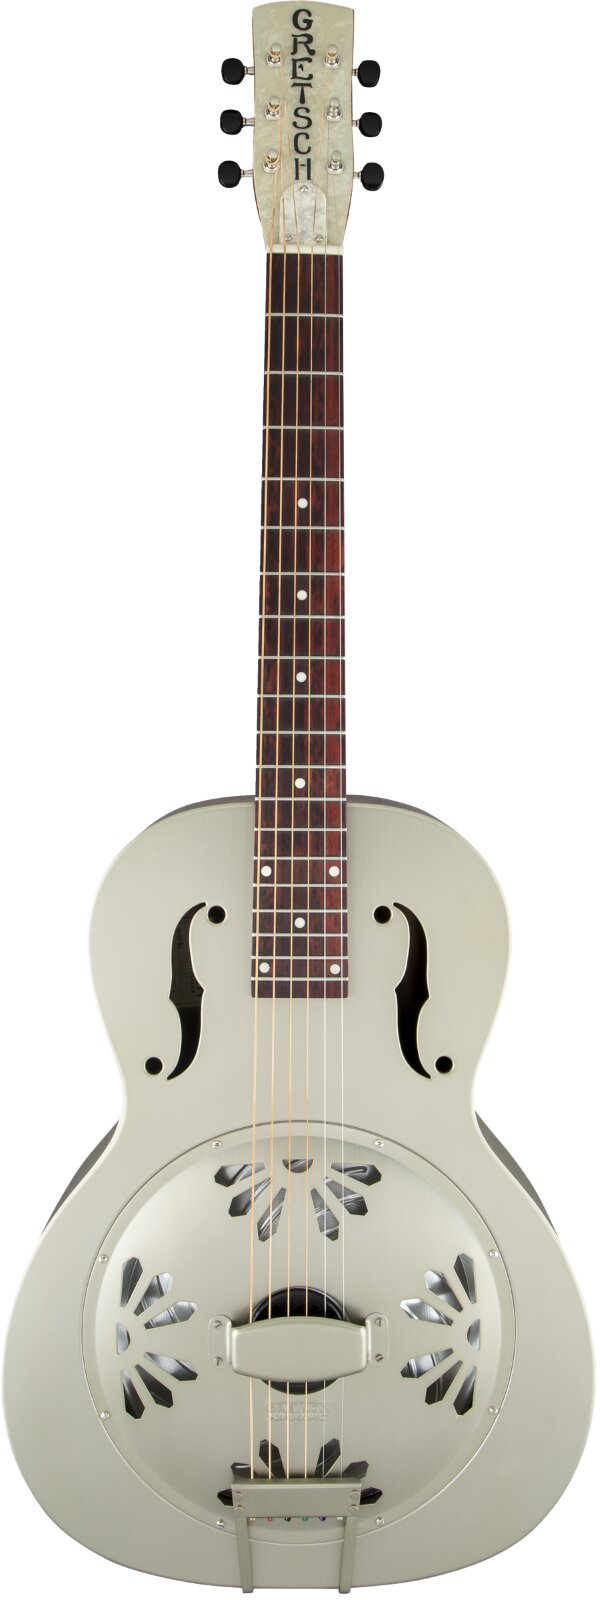 Gretsch G9201 Honey Dipper Round-Neck, Brass Body Biscuit Cone Resonator Guitar, Shed Roof Finish : photo 1